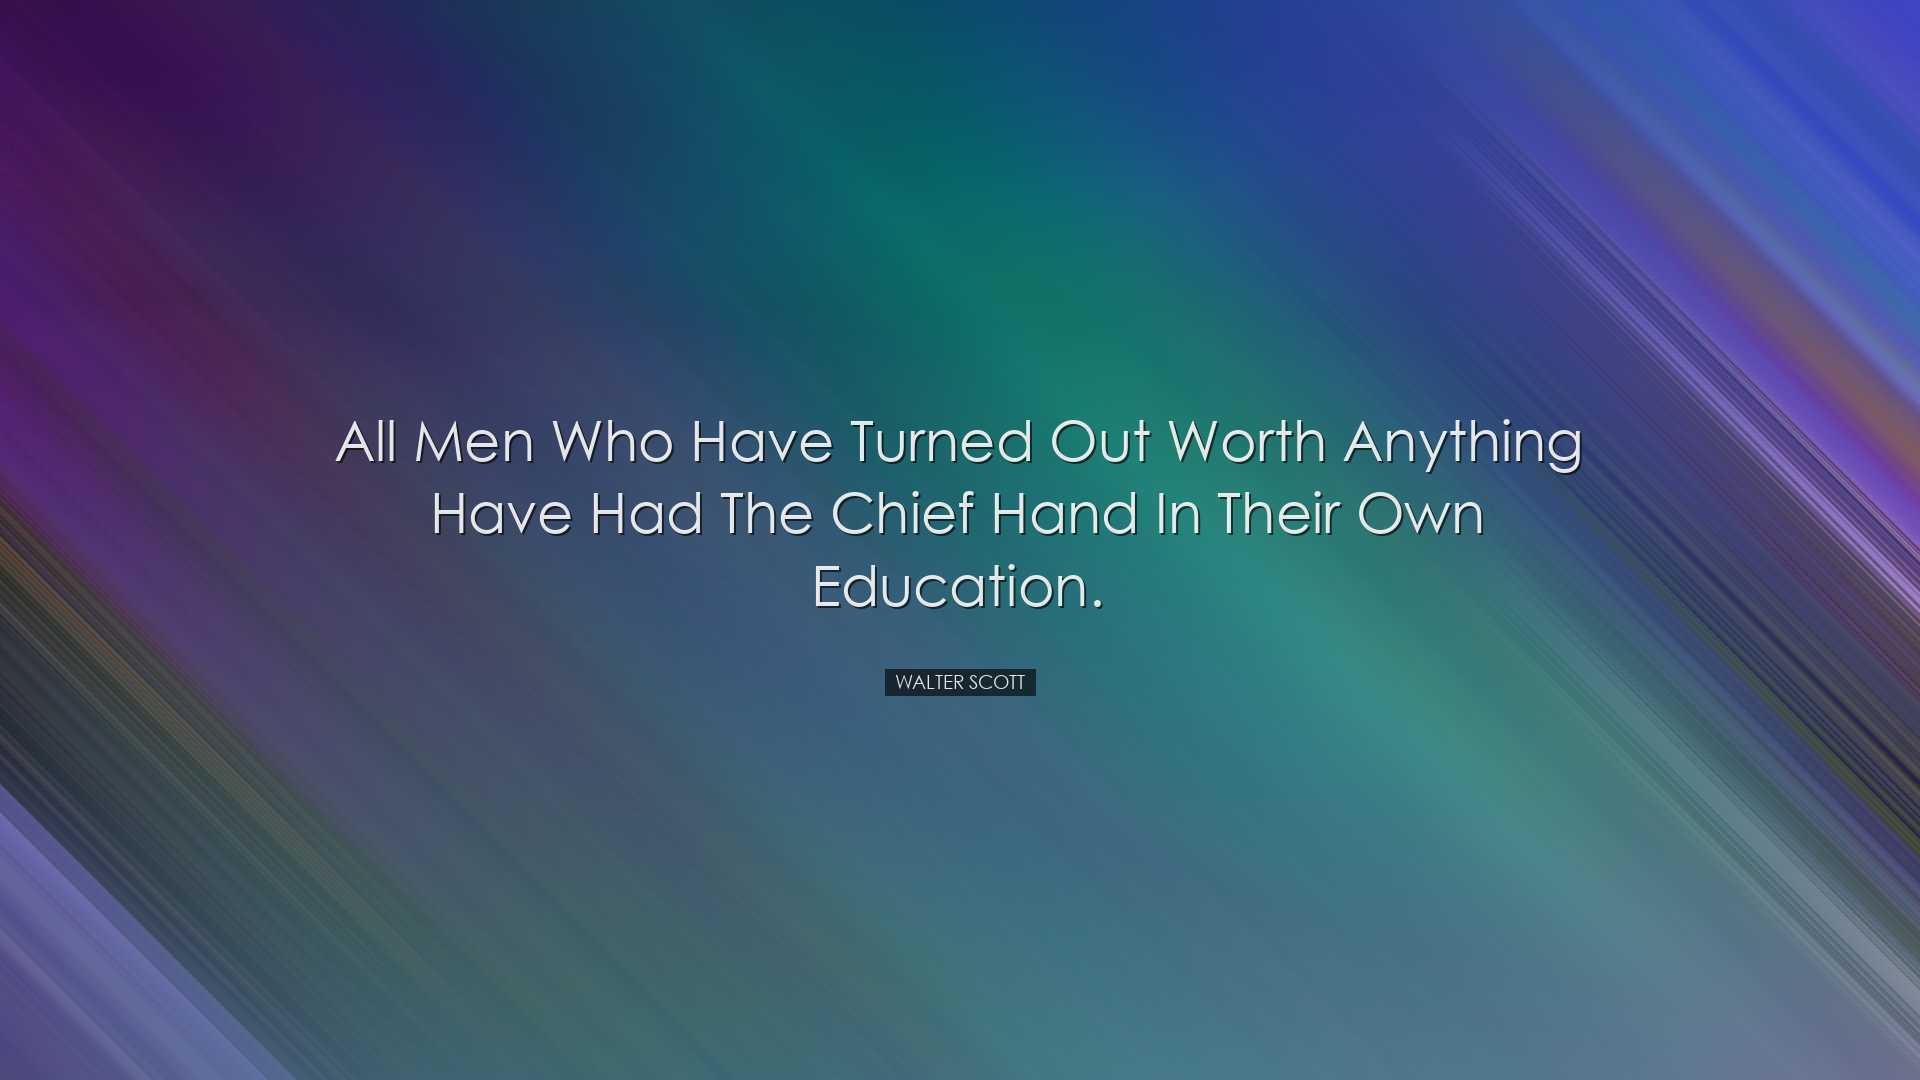 All men who have turned out worth anything have had the chief hand